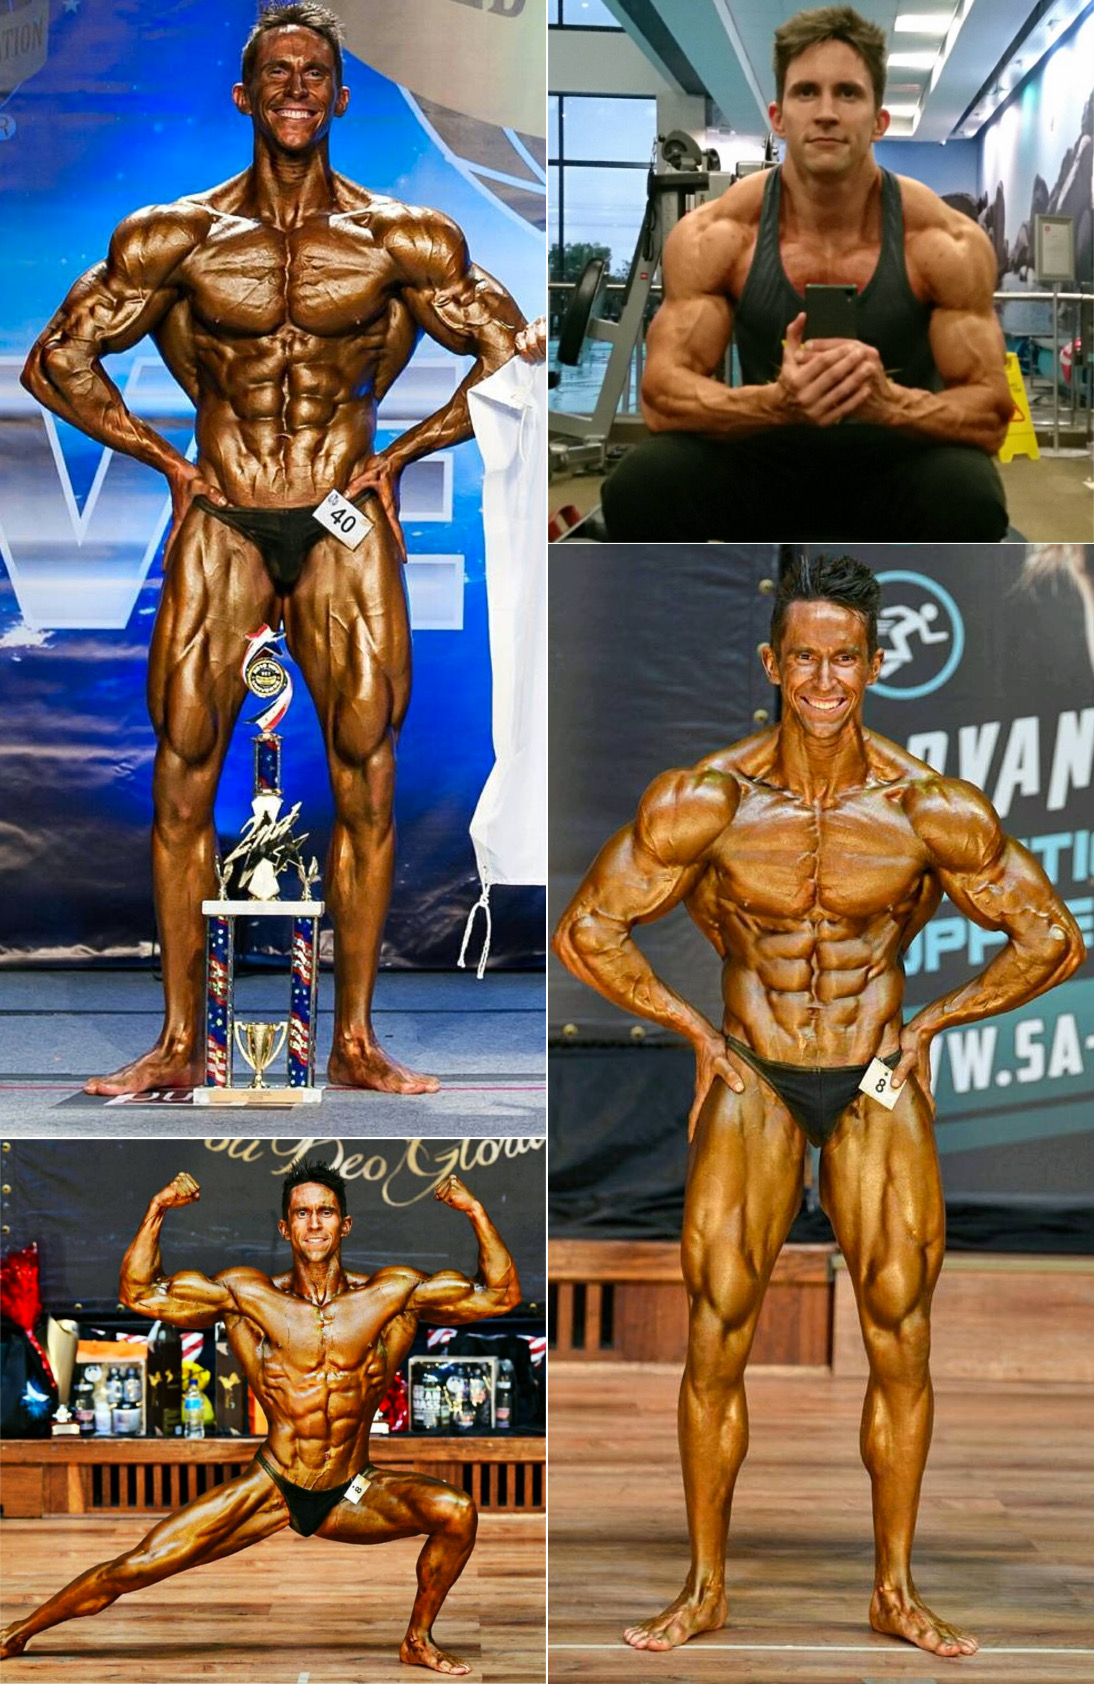 Fitnish.com interview With Exercise physiologist And Bodybuilder, Jason Dunning